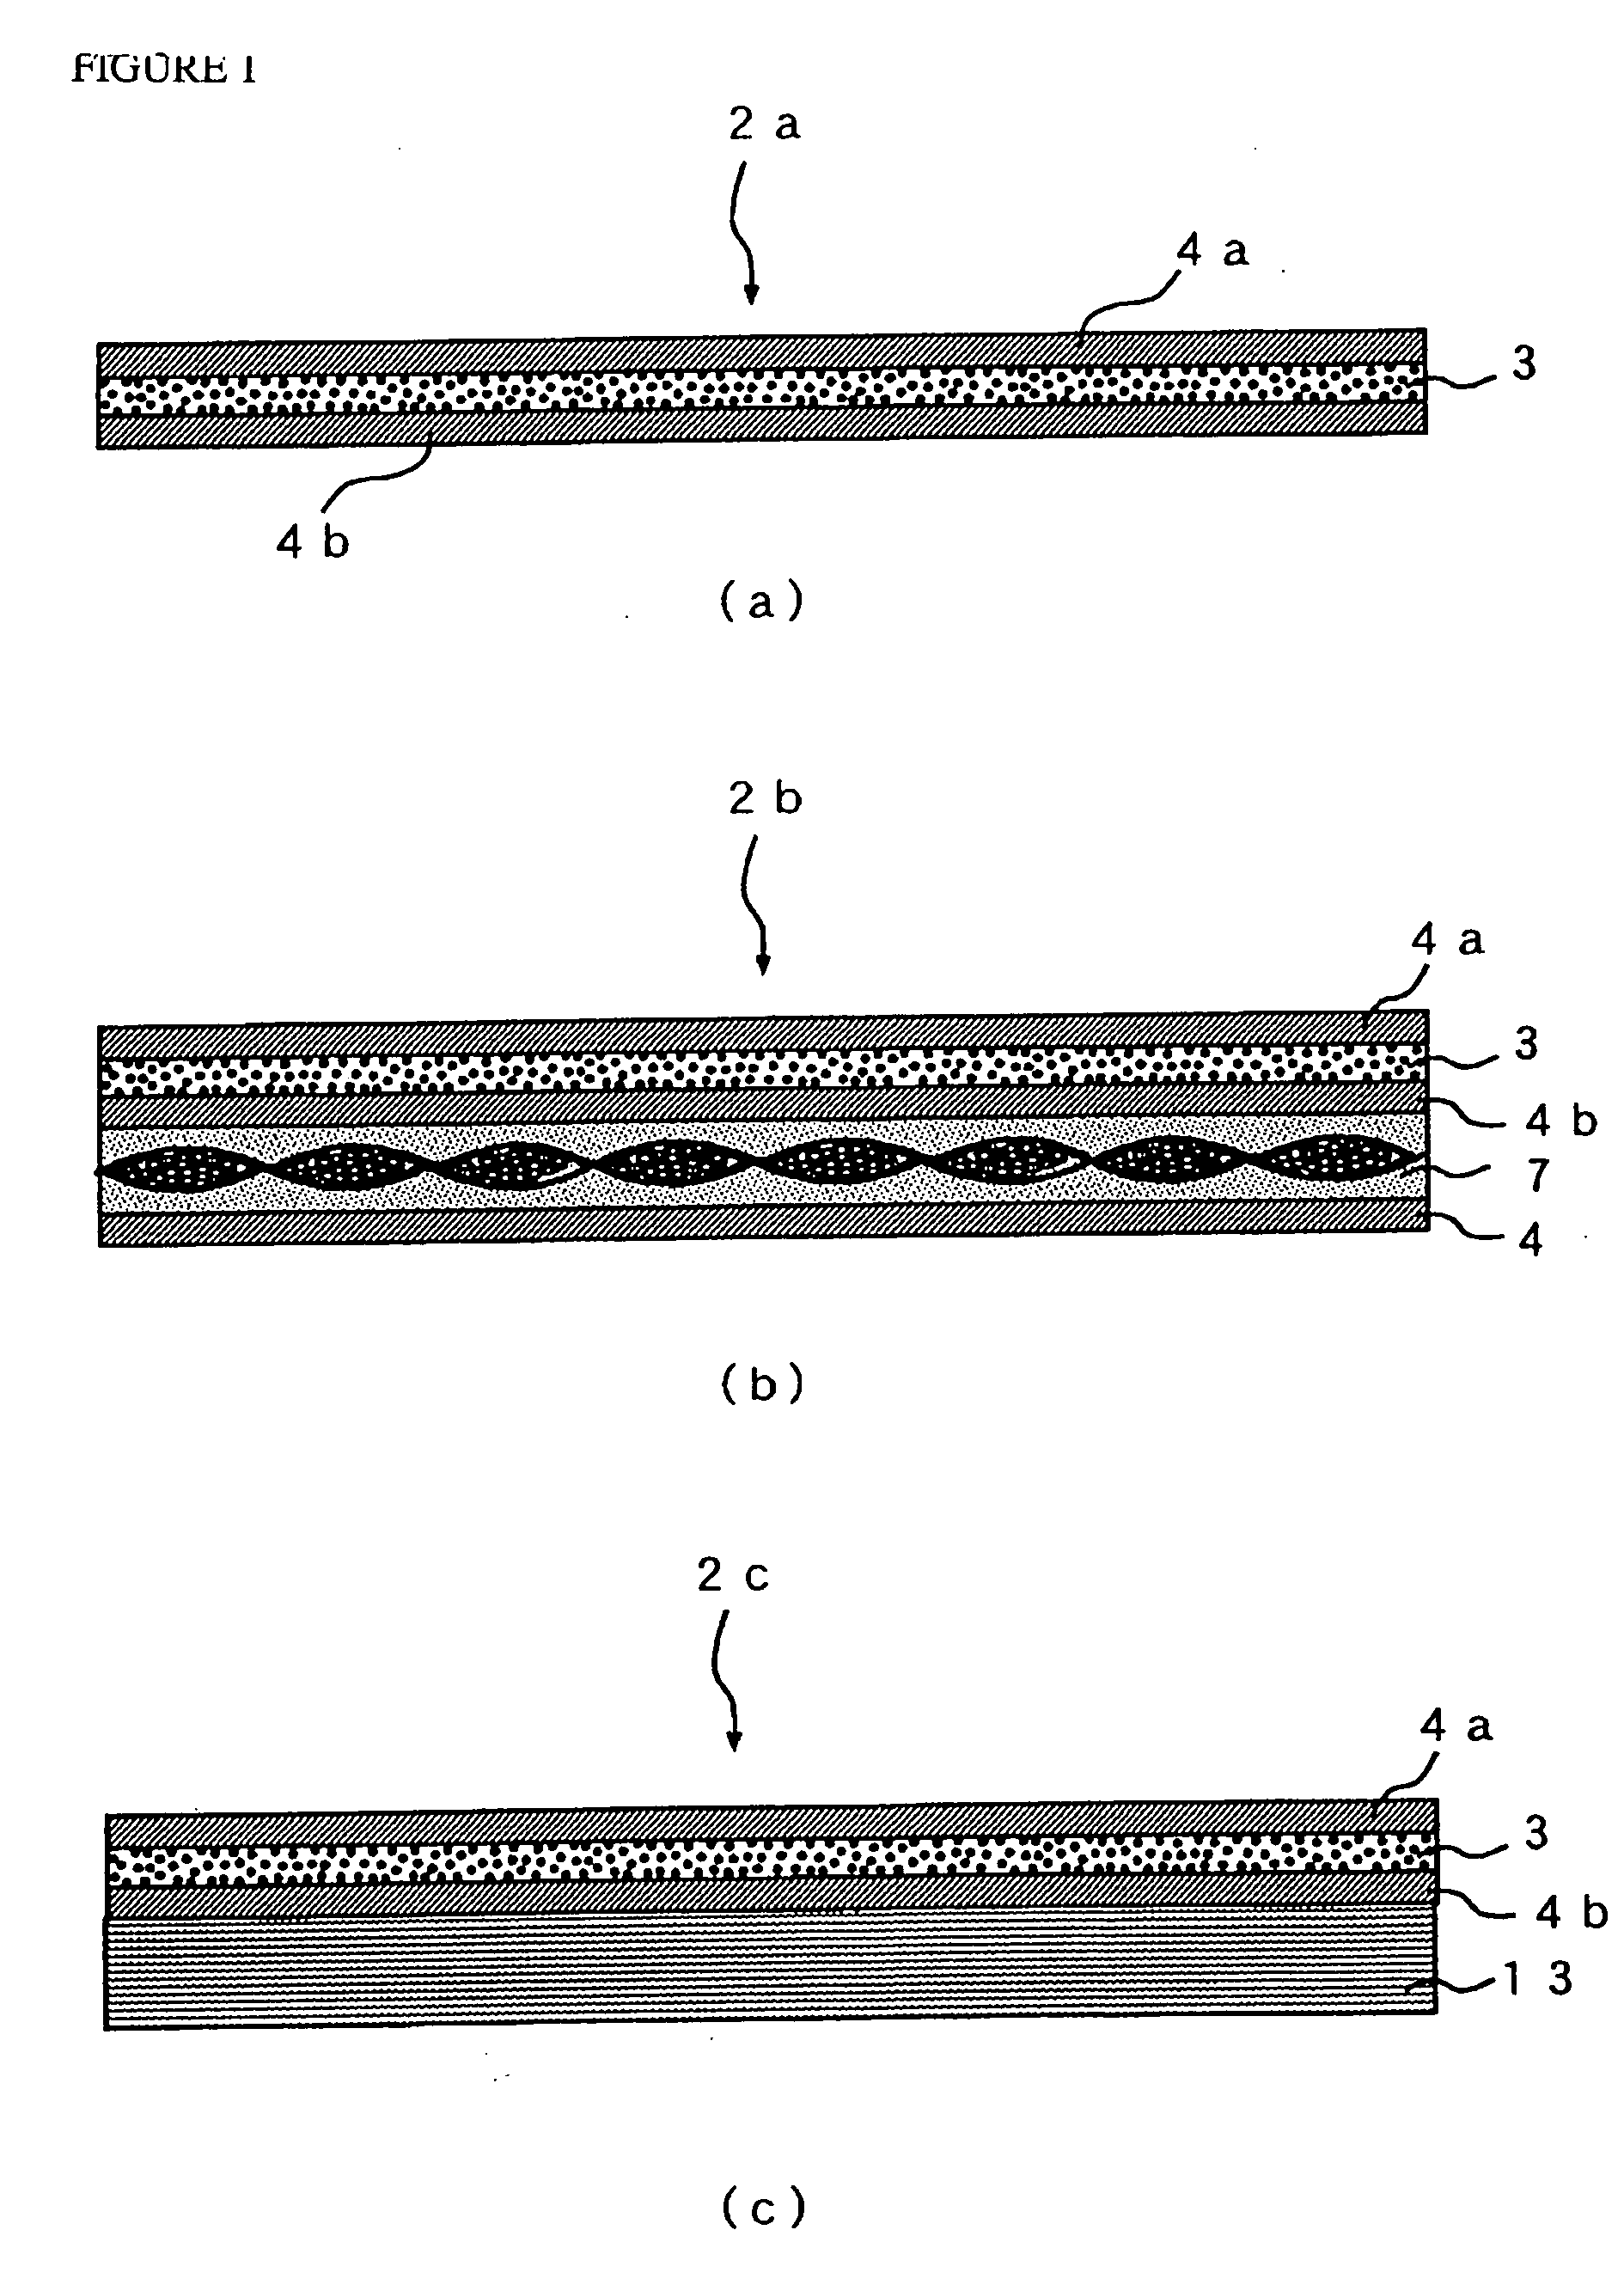 Method for Manufacturing Dielectric Layer Constituting Material, Dielectric Layer Constituting Material Obtained Thereby; Method for Manufacturing Capacitor Circuit Forming Piece Using Dielectric Layer Constituting Material, Capacitor Circuit Forming Piece Obtained Thereby; and Multi-Layer Printed Wiring Board Obtained by Using Dielectric Layer Constituting Material and/or Capacitor Circuit Forming Piece